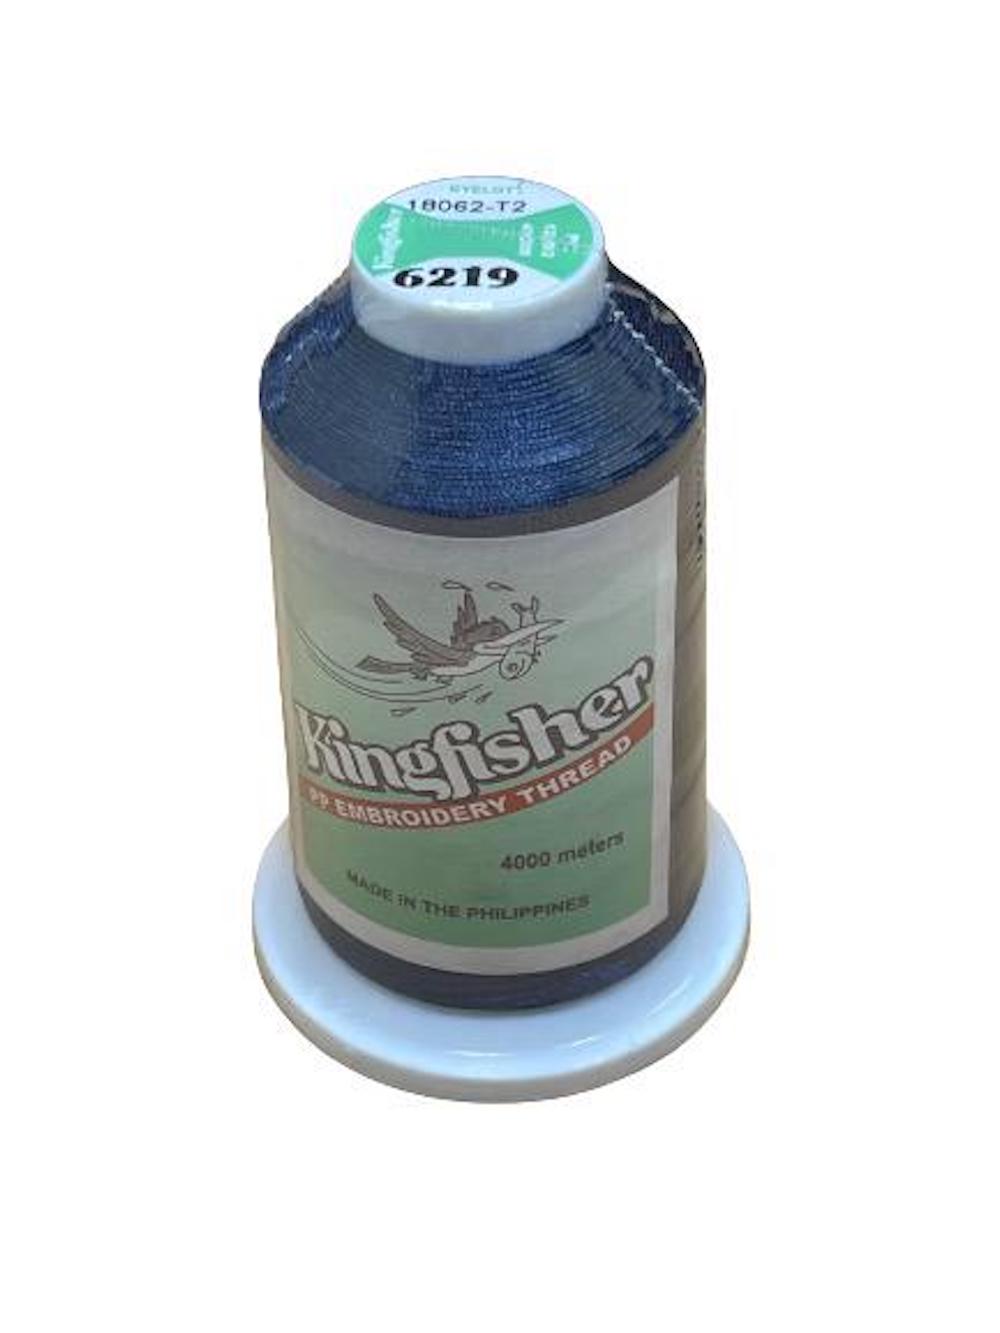 King Fisher Embroidery Thread 4000m 6219 - MY SEWING MALL